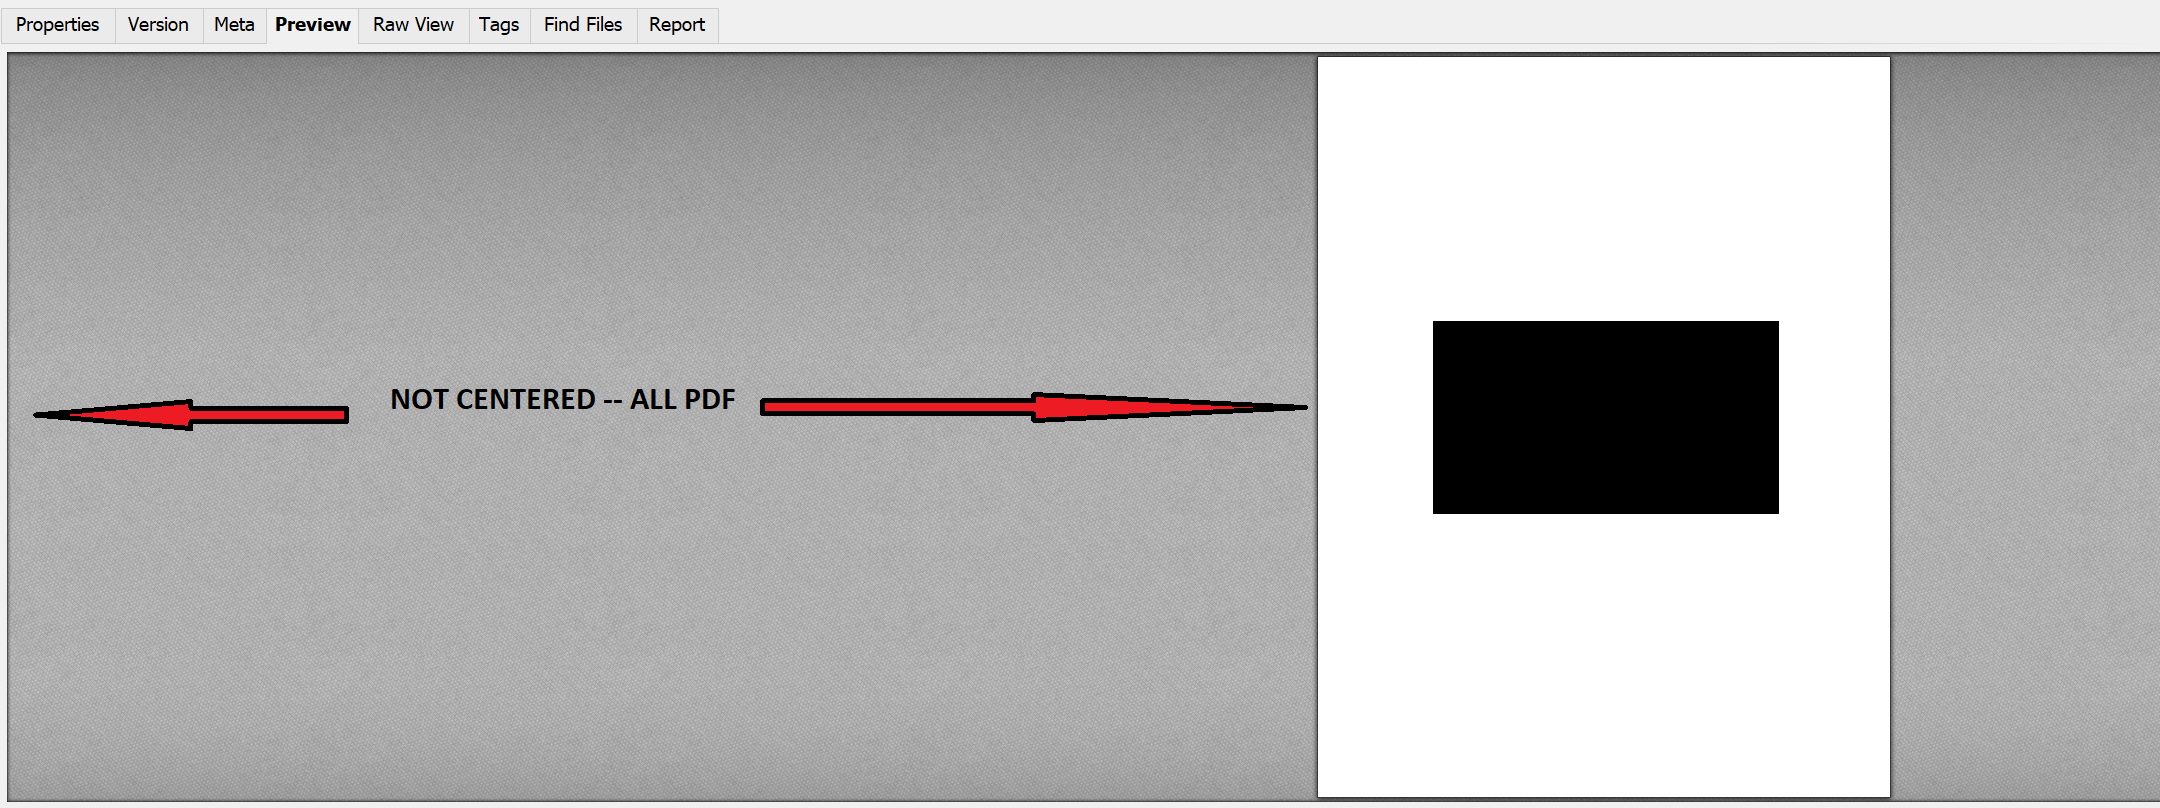 TAB PREVIEW of PDF (not centered as it is with the PREVIEW PANE)